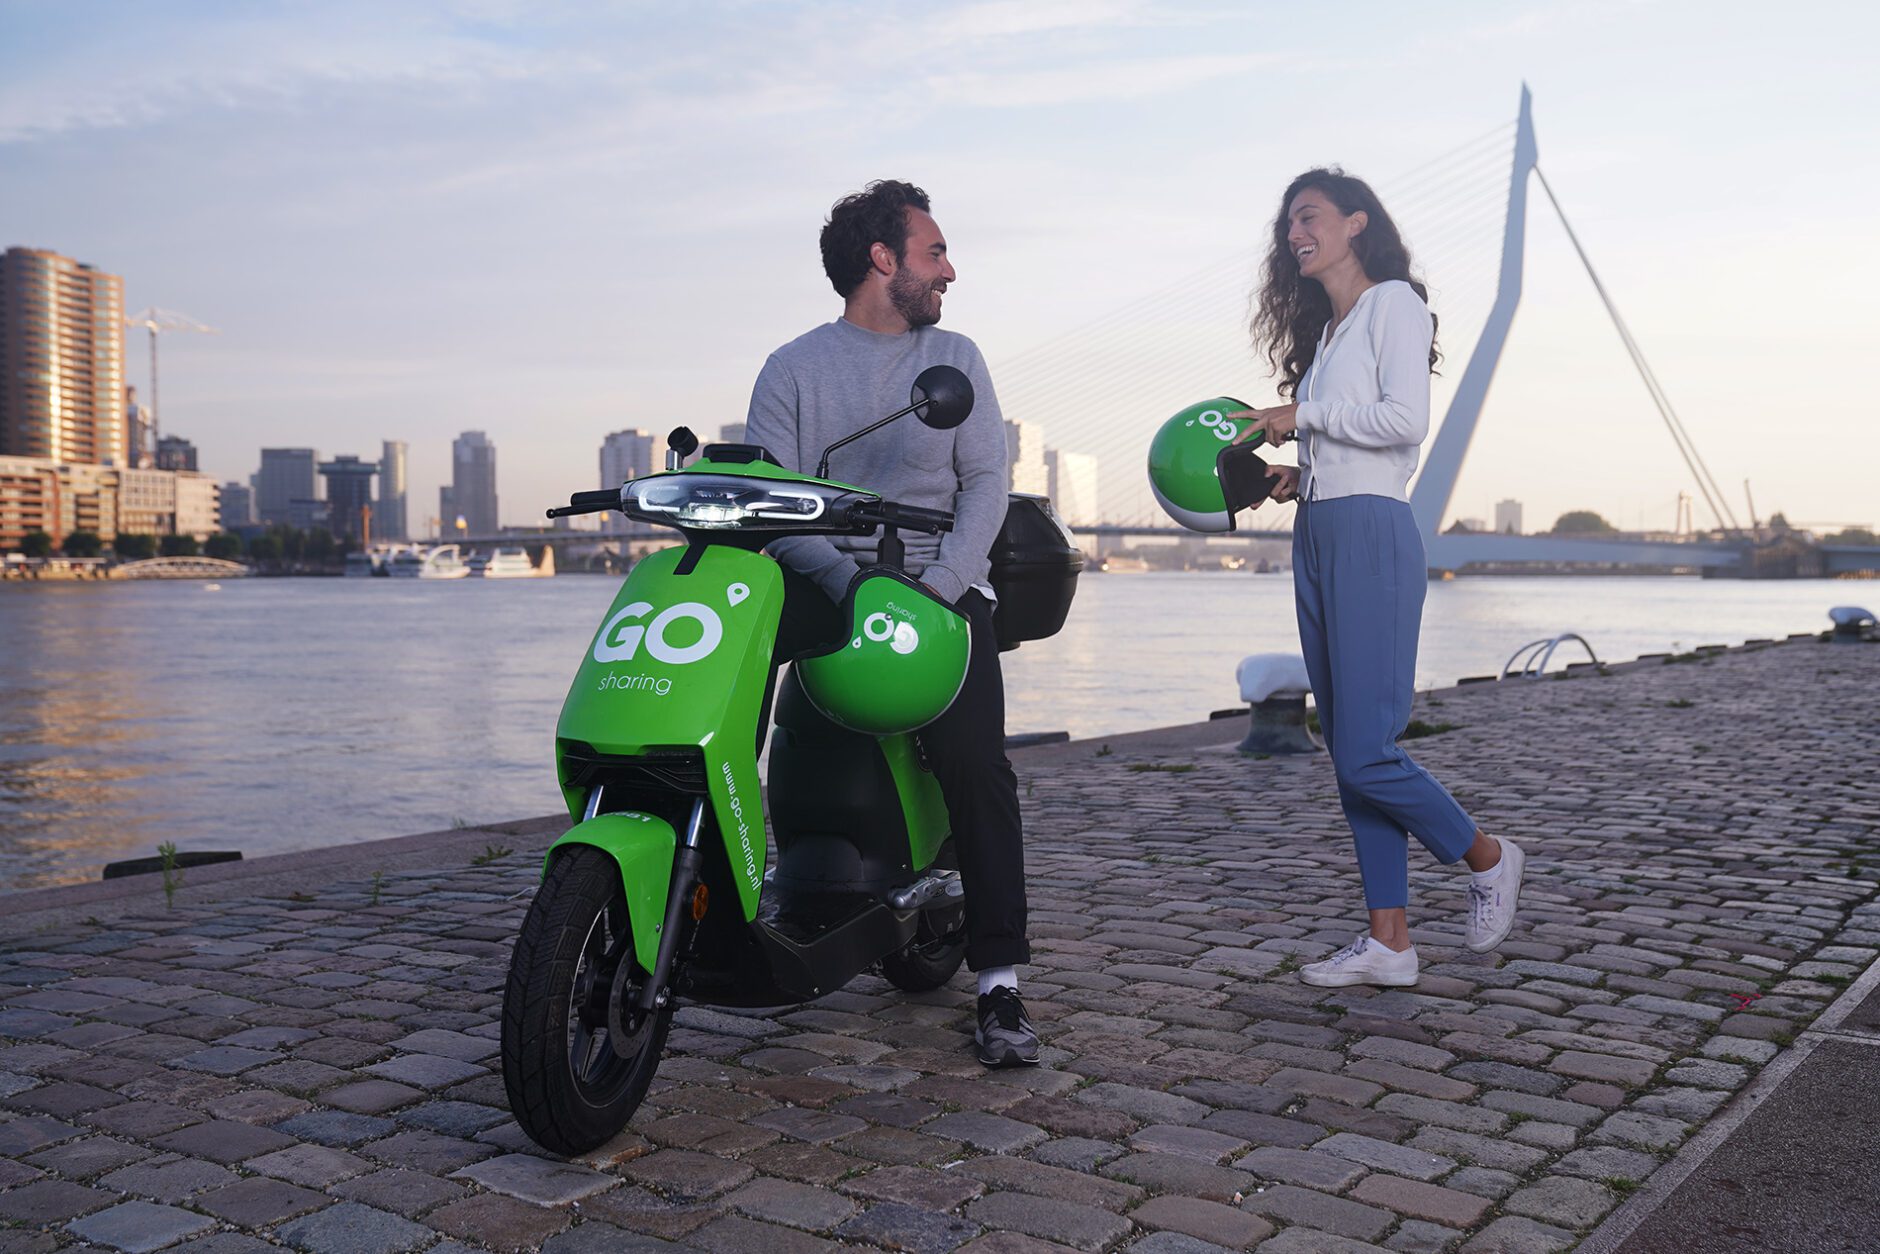 GO Sharing lanceert 500 e-scooters in Brussel